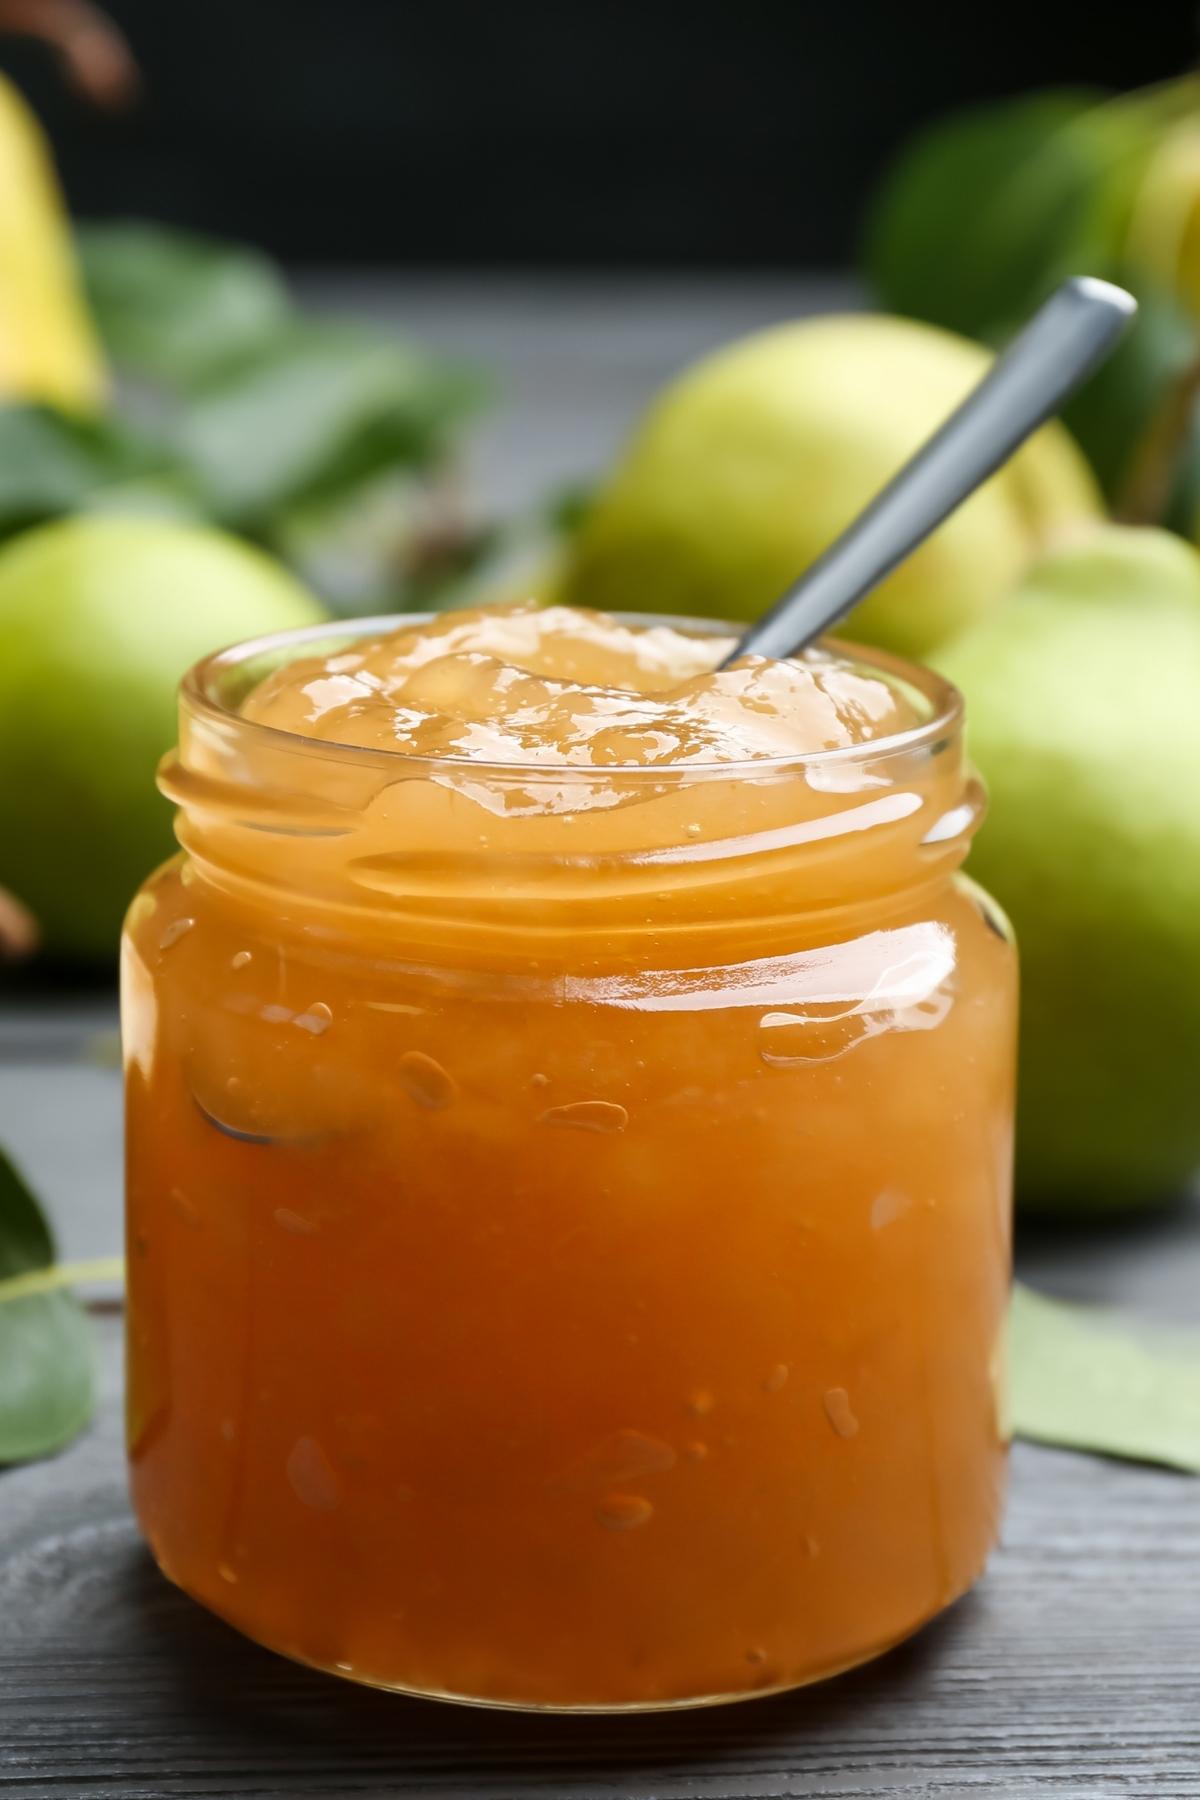 Making fruit jam at home is easier than you think! These Pear Preserves are sweet, have a great texture, and only require 3 ingredients!